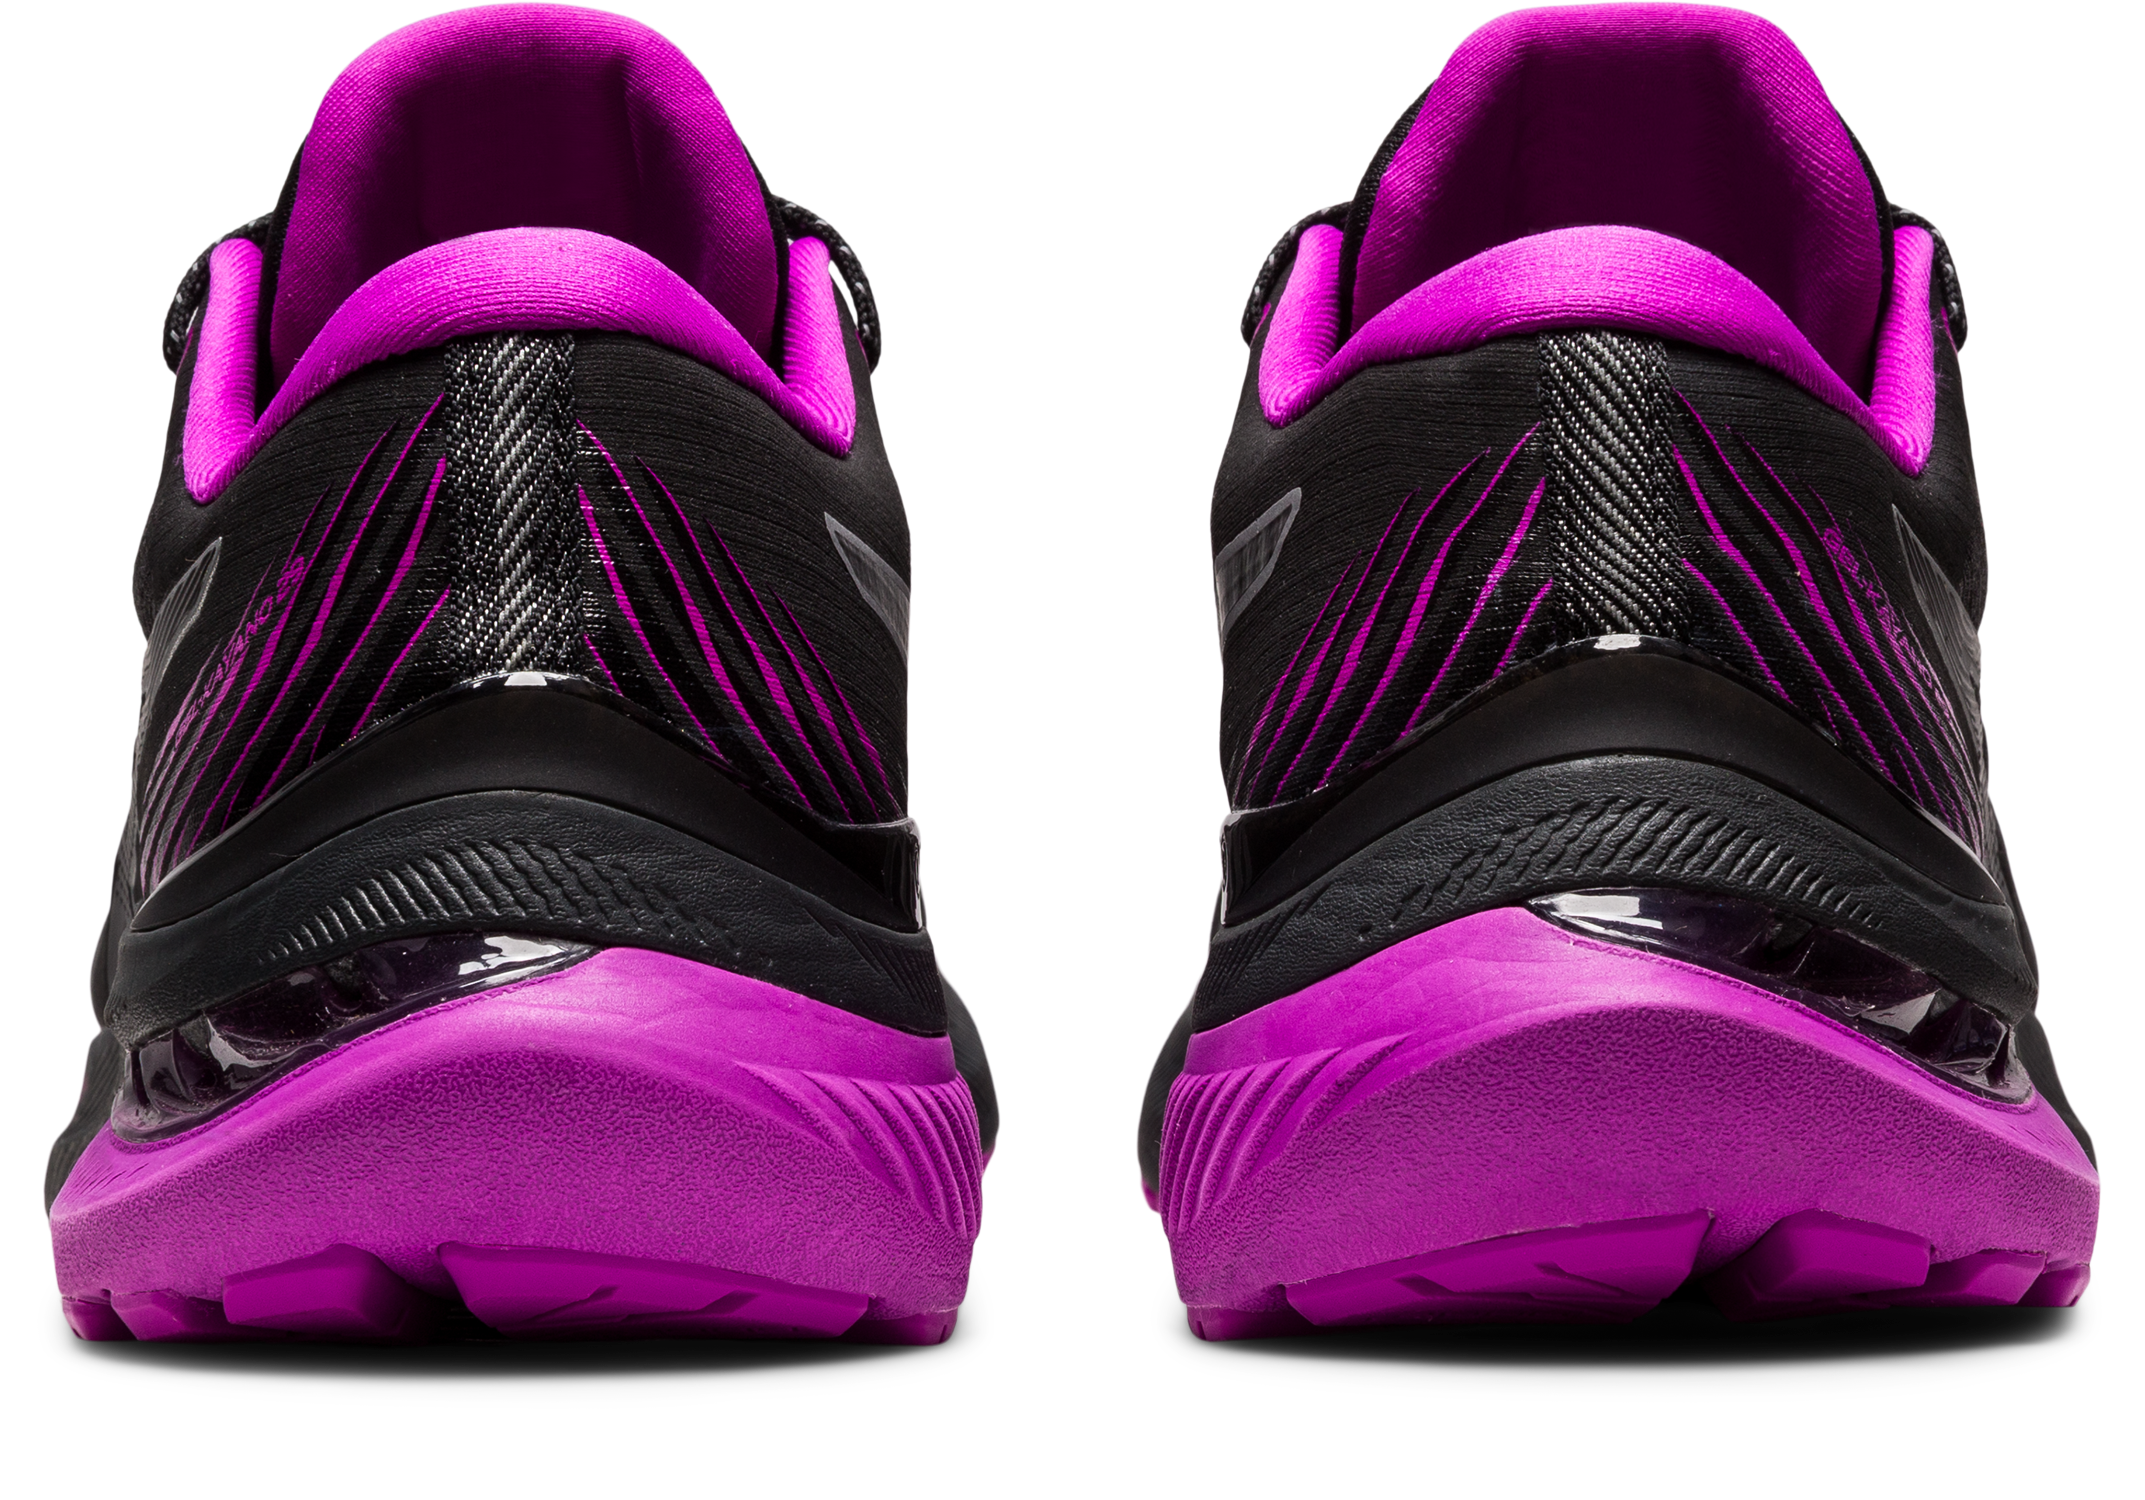 Asics Women's Gel-Kayano 29 Lite-Show Running Shoes in Black/Orchid